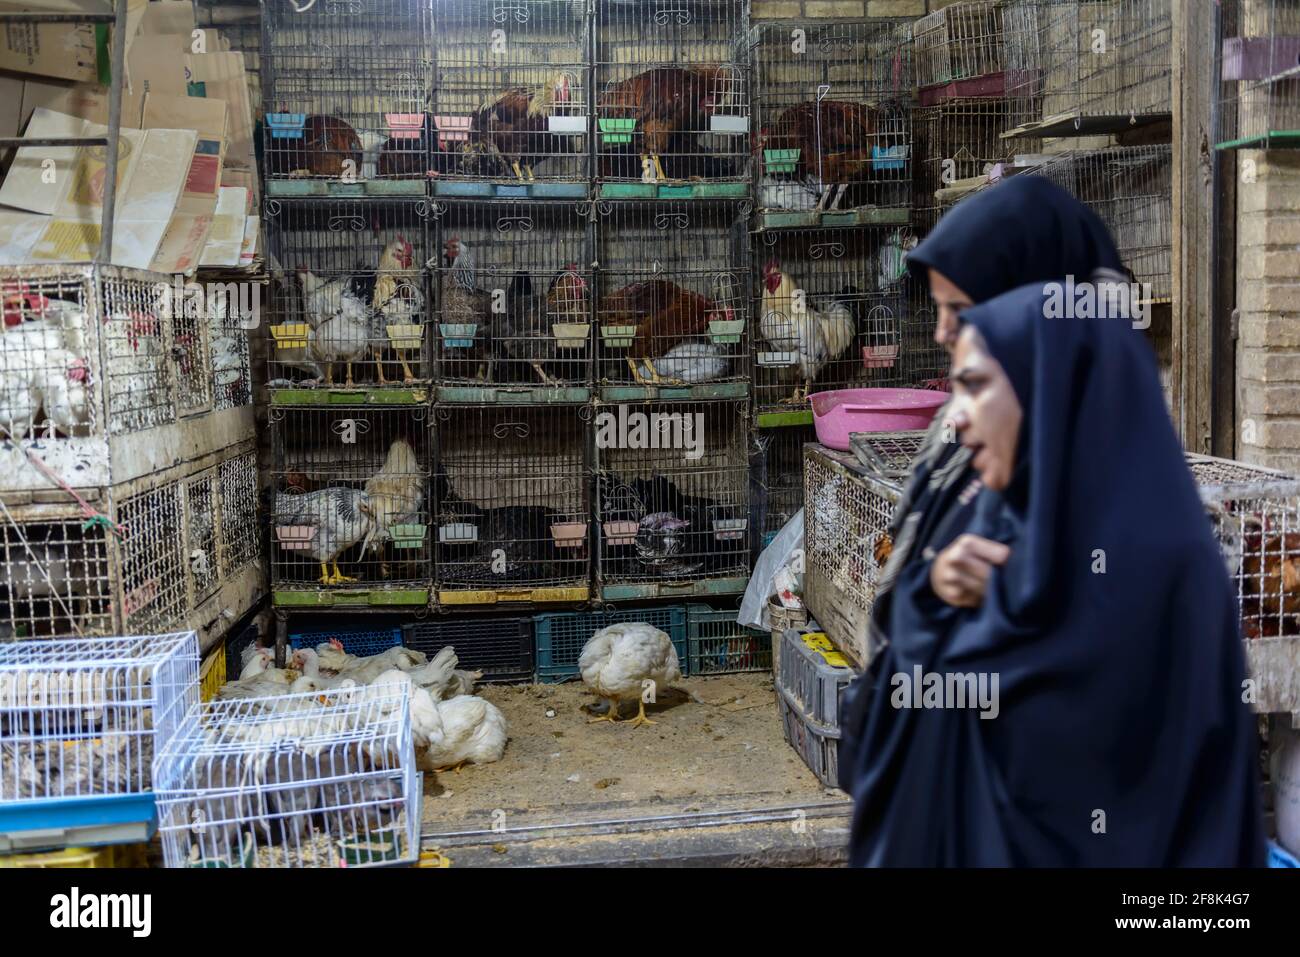 The poultry section in the covered bazaar in Qazvin, Iran. Stock Photo